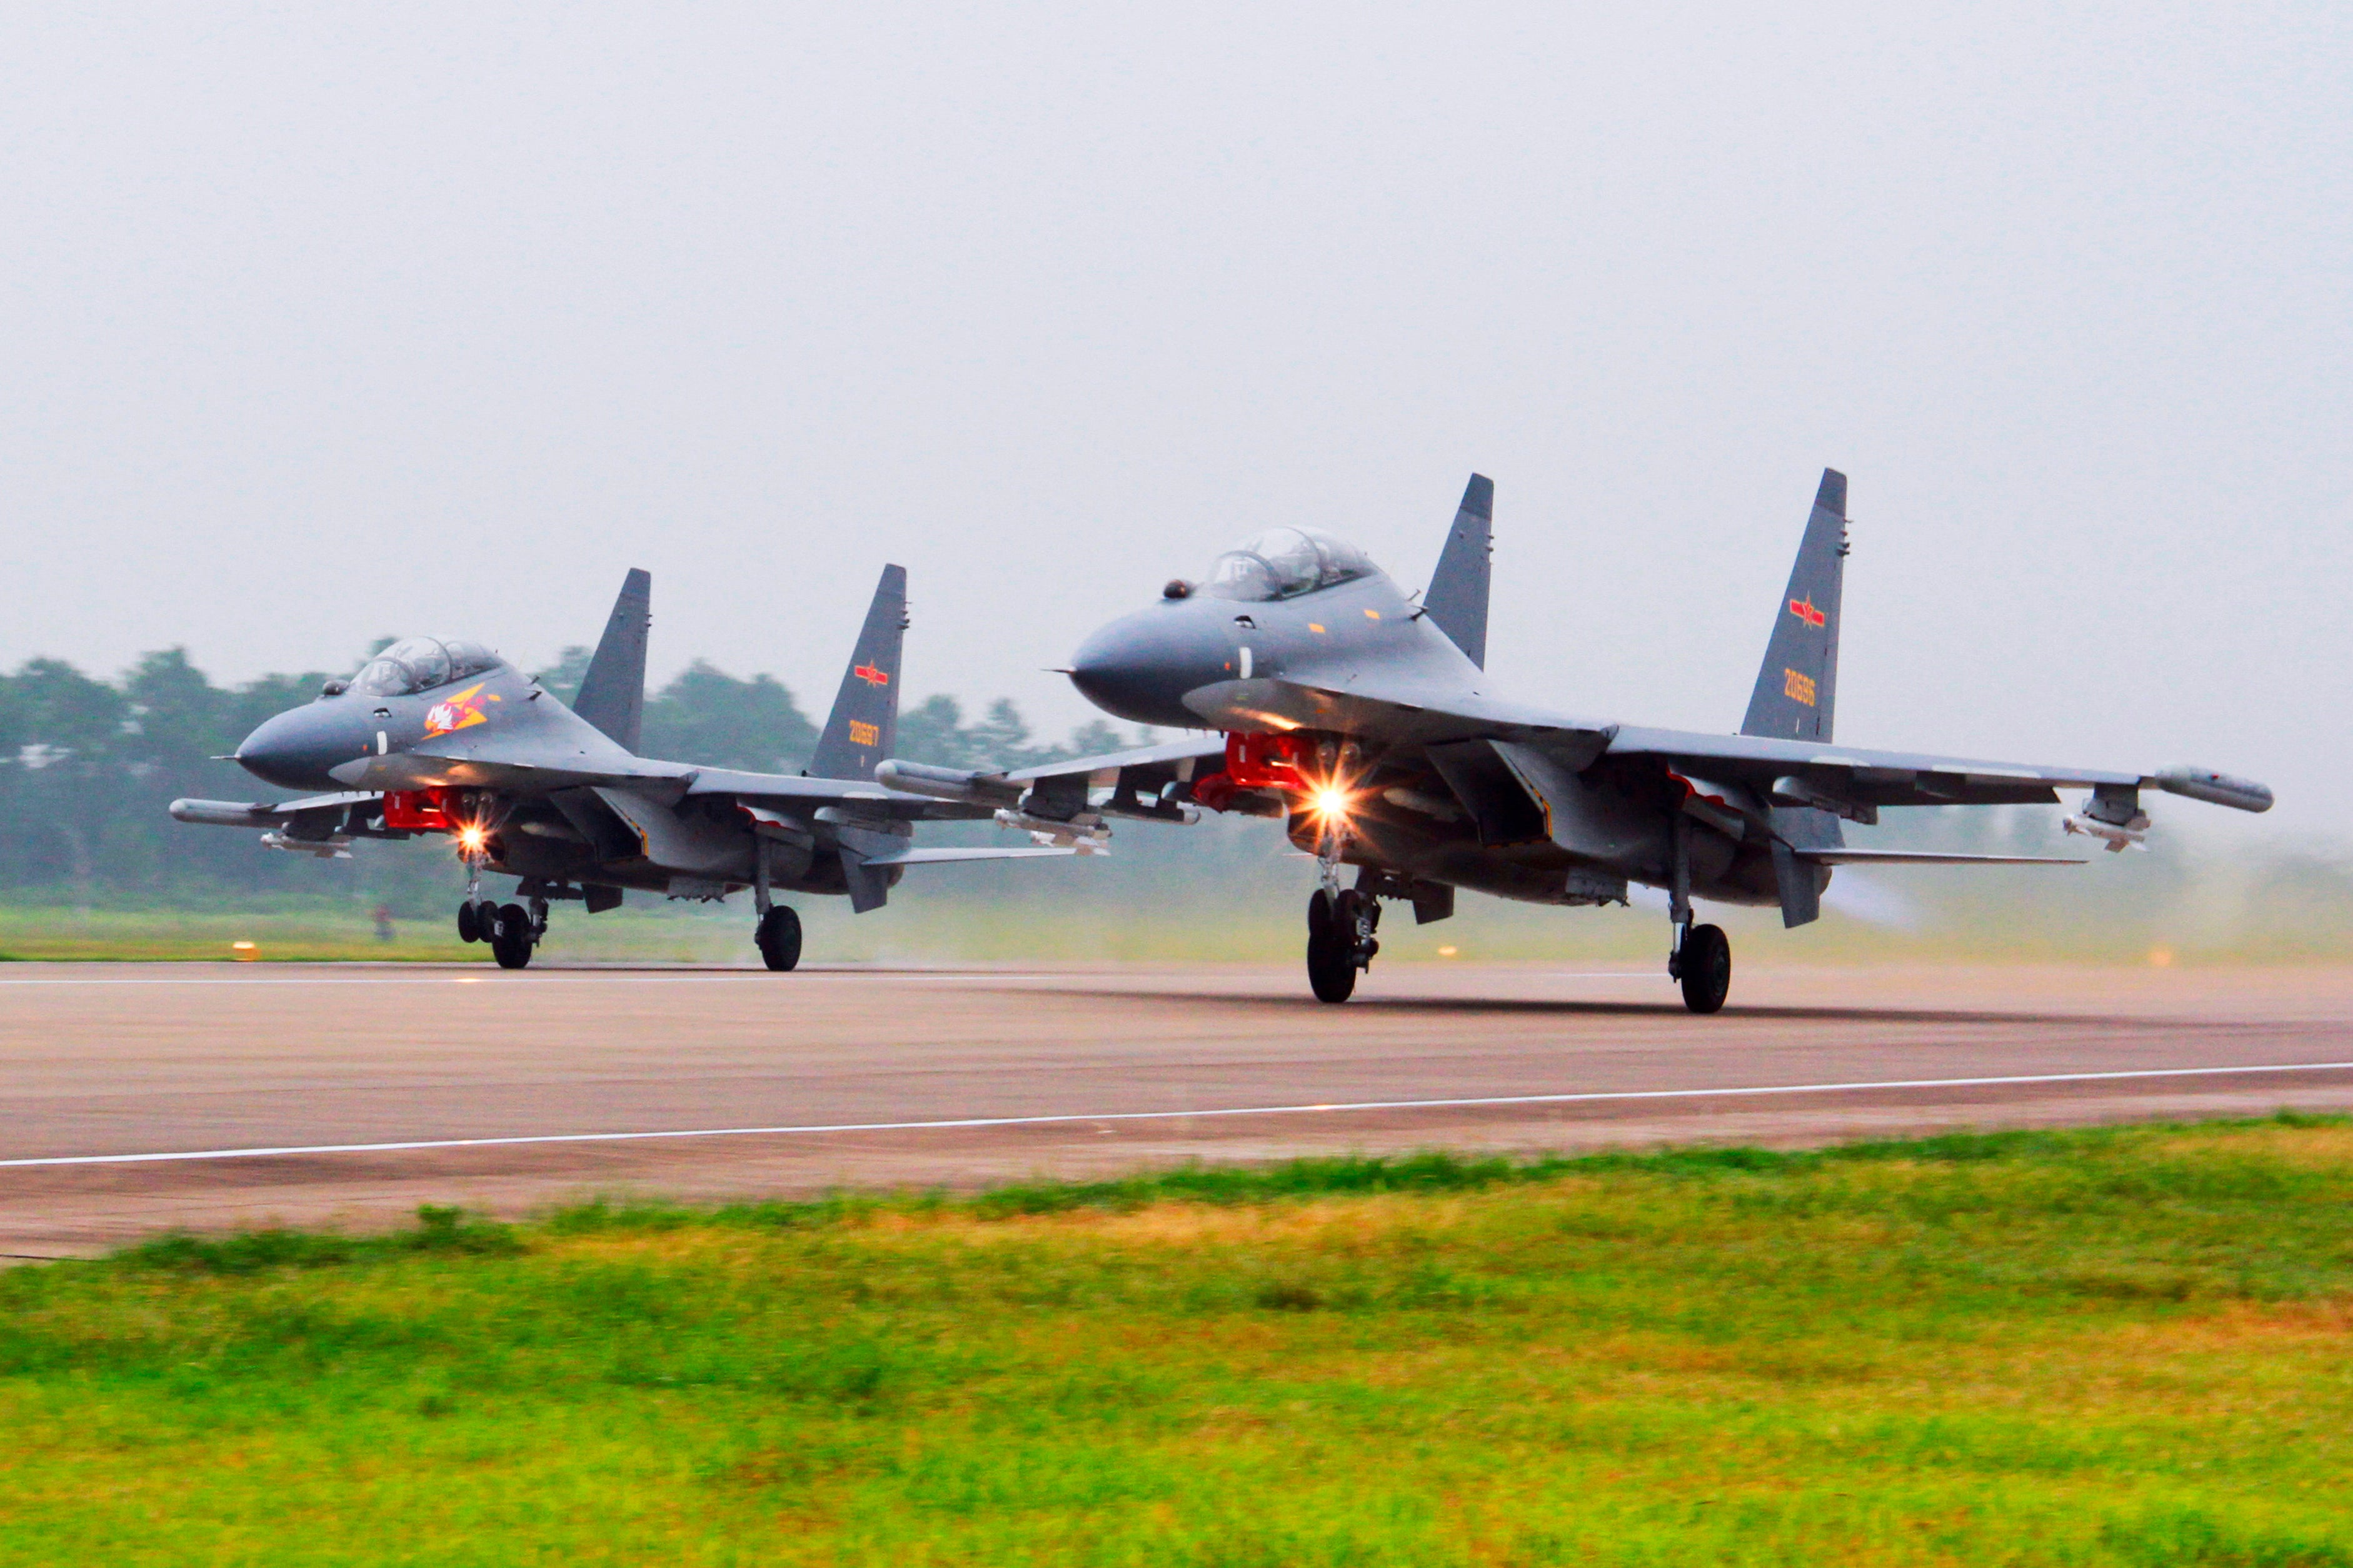 A record number of Chinese warplanes were detected in Taiwanese airspace, authorities said